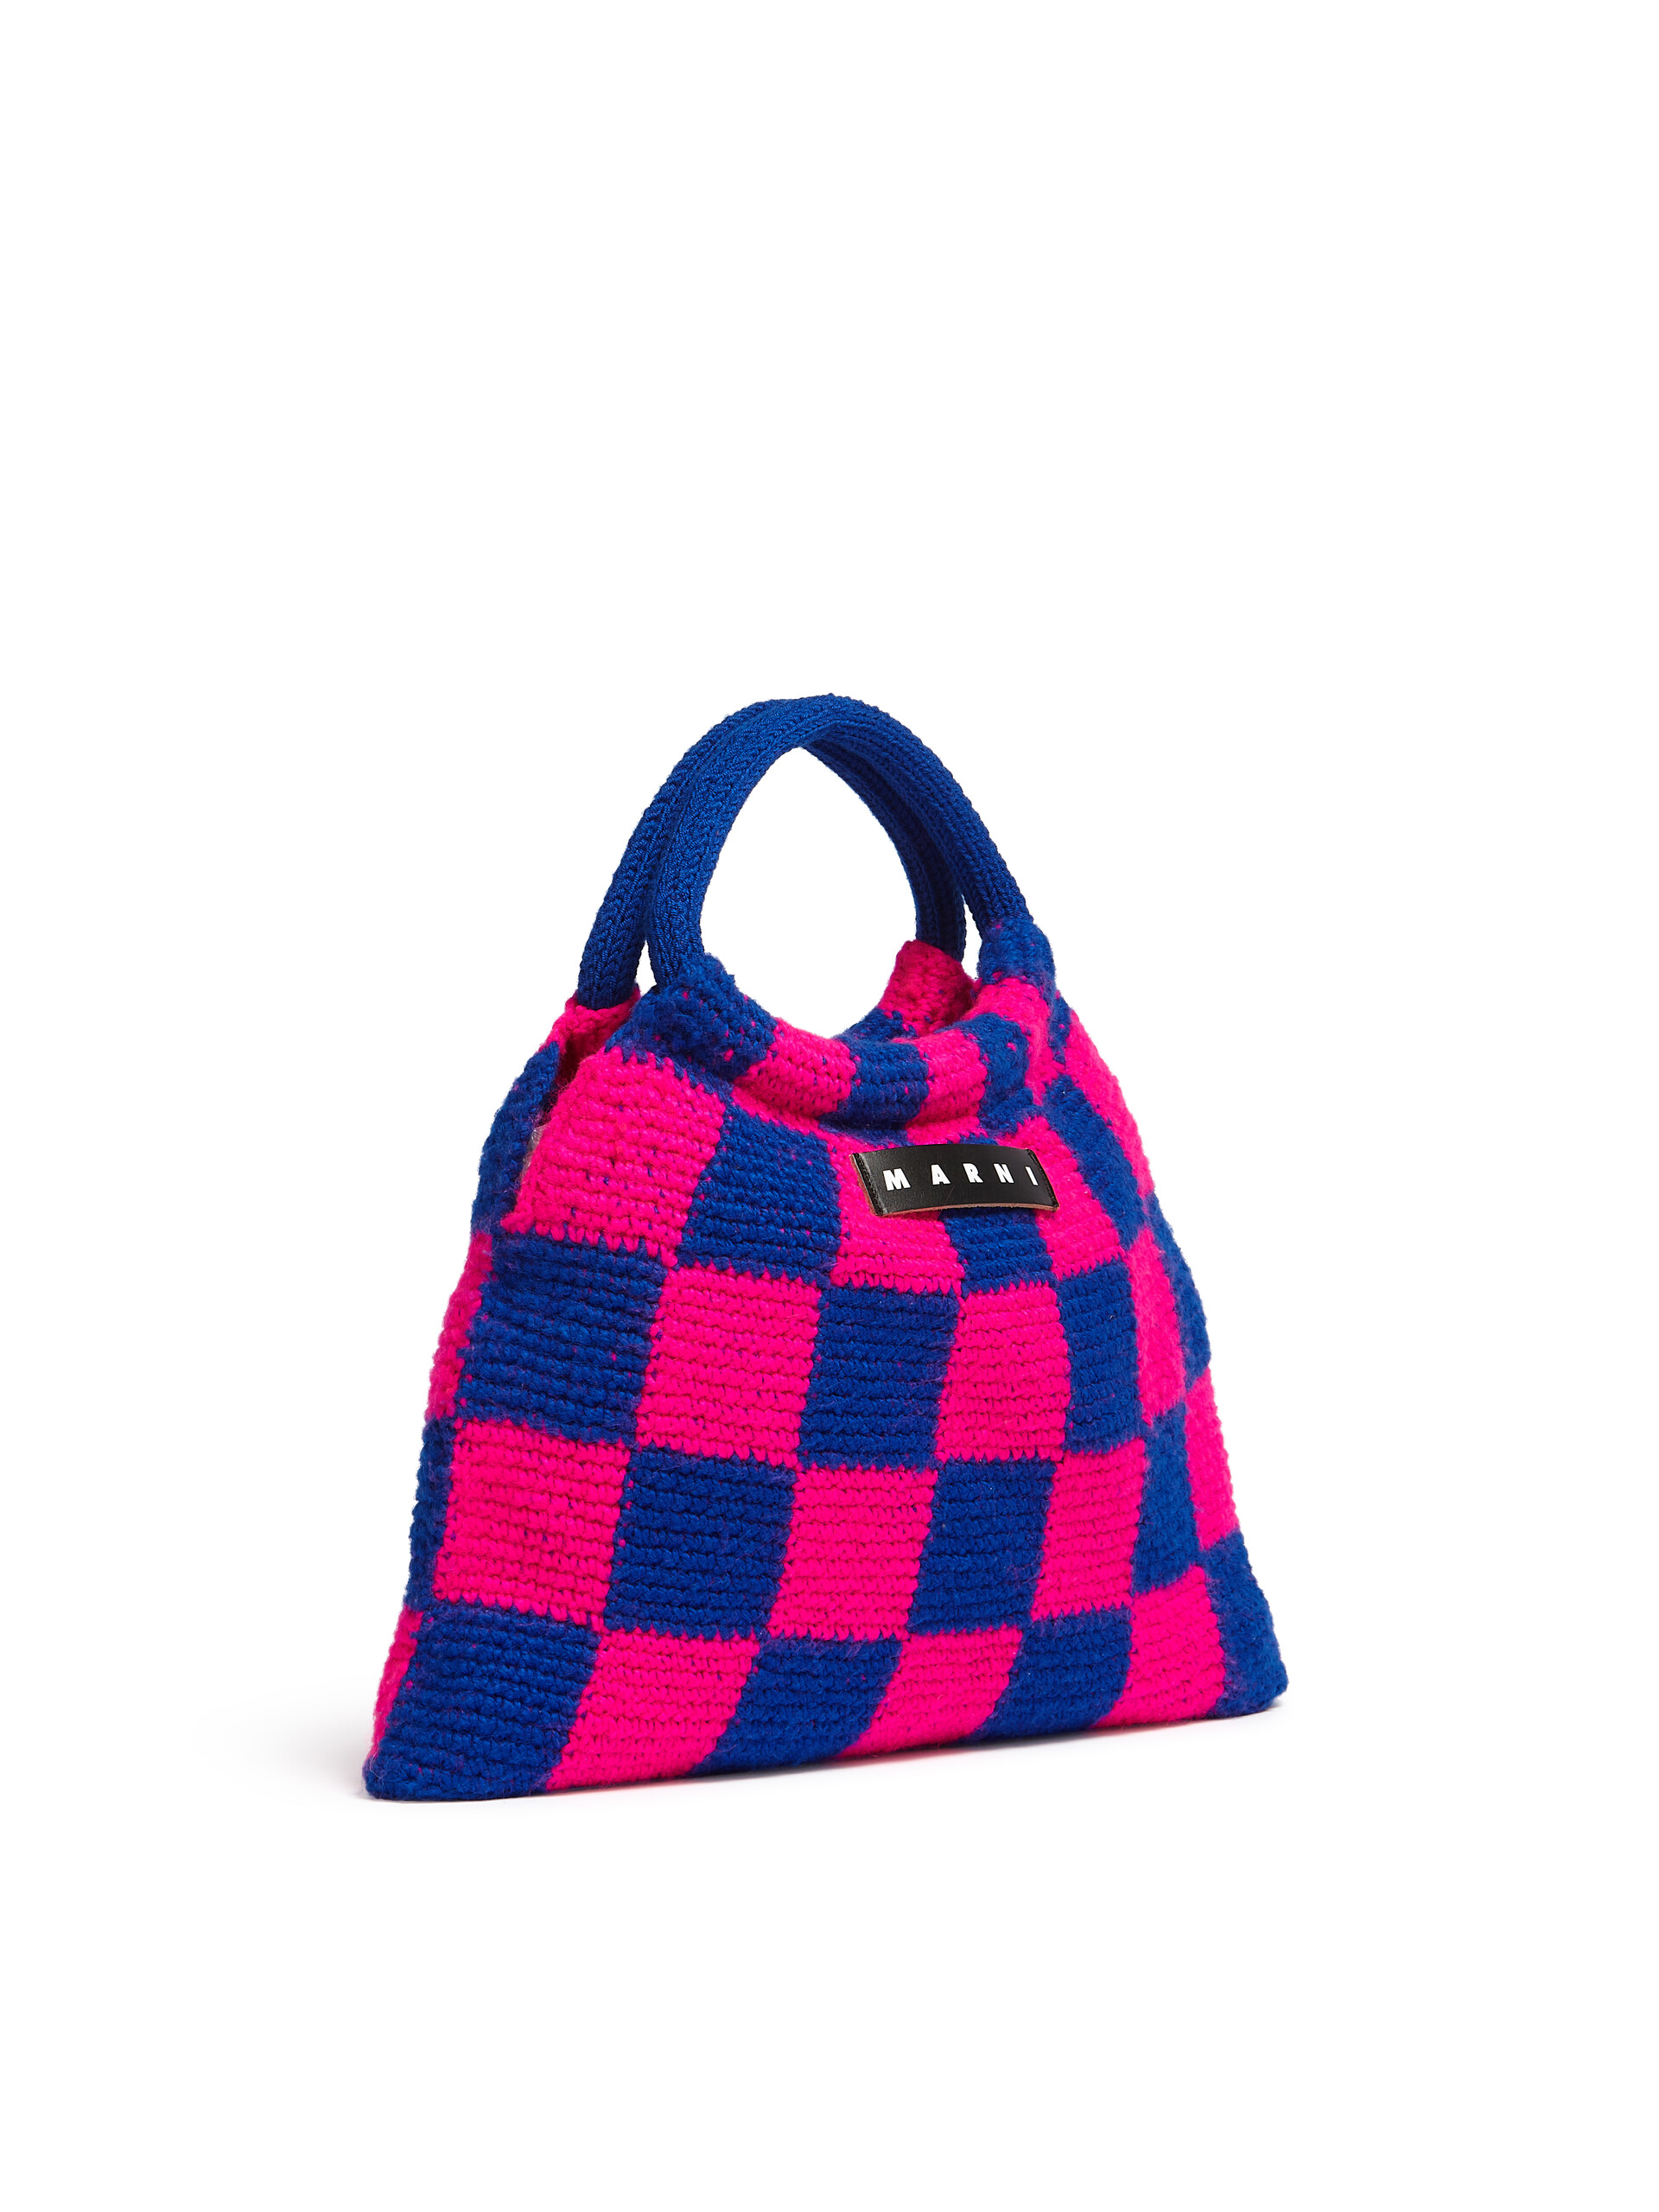 MARNI MARKET bag in pink and blue crochet - Bags - Image 2